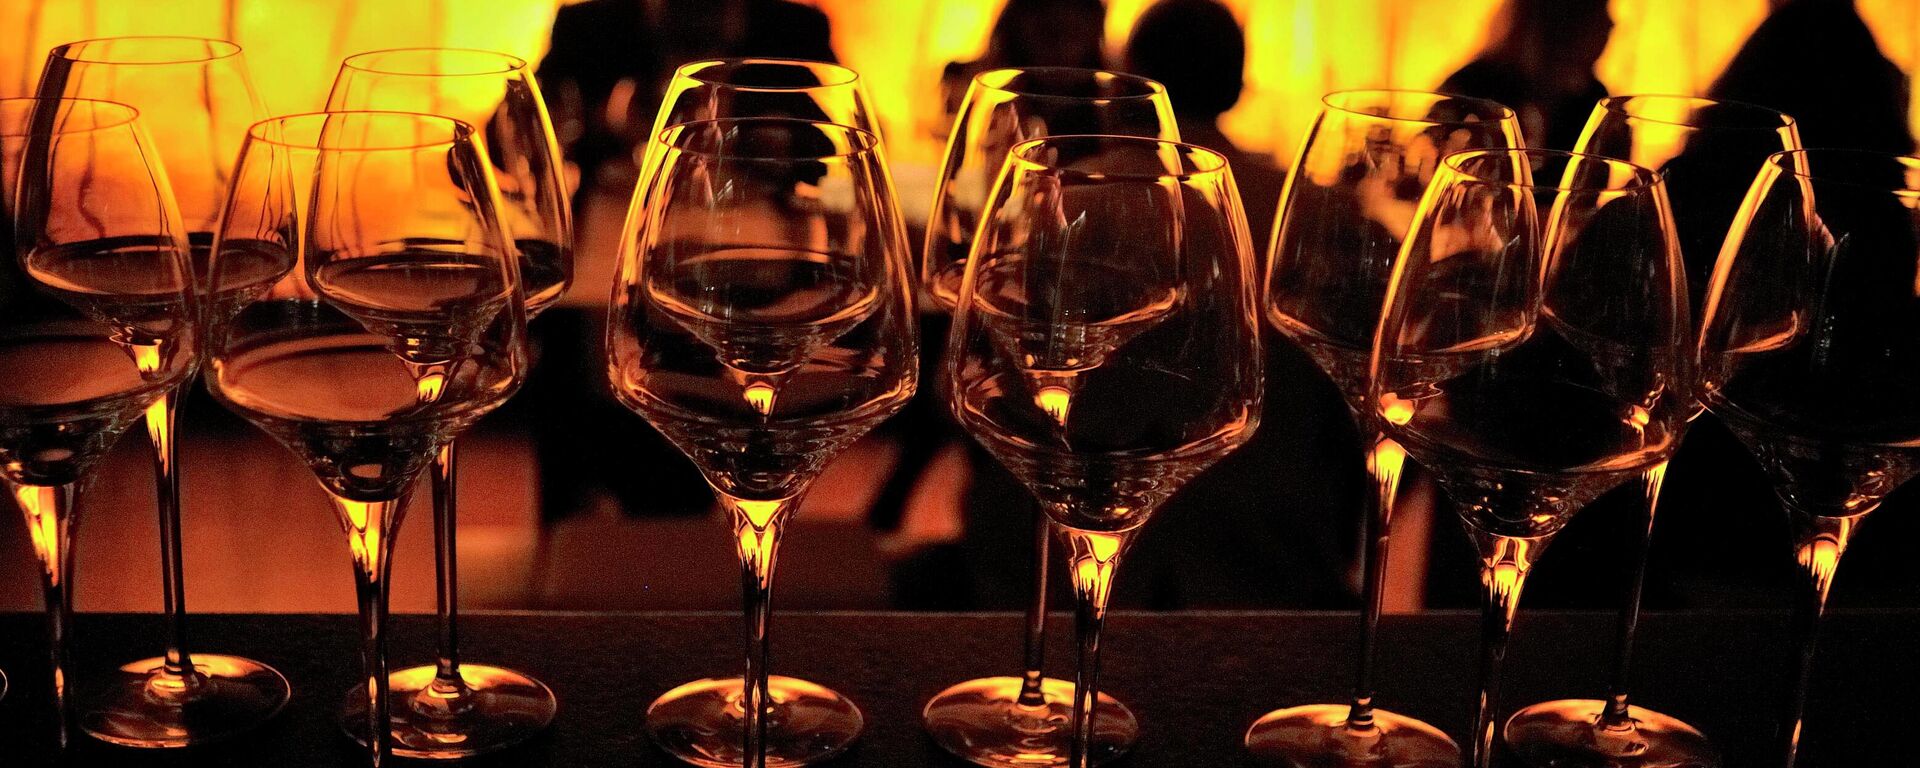 In this Sunday, Jan. 16, 2011 photo, wine glasses stand in the foreground of a group learning wine appreciation and fine dining, being conducted by Tulleeho Beverage Innovations at a restaurant in New Delhi, India. - Sputnik भारत, 1920, 26.02.2023